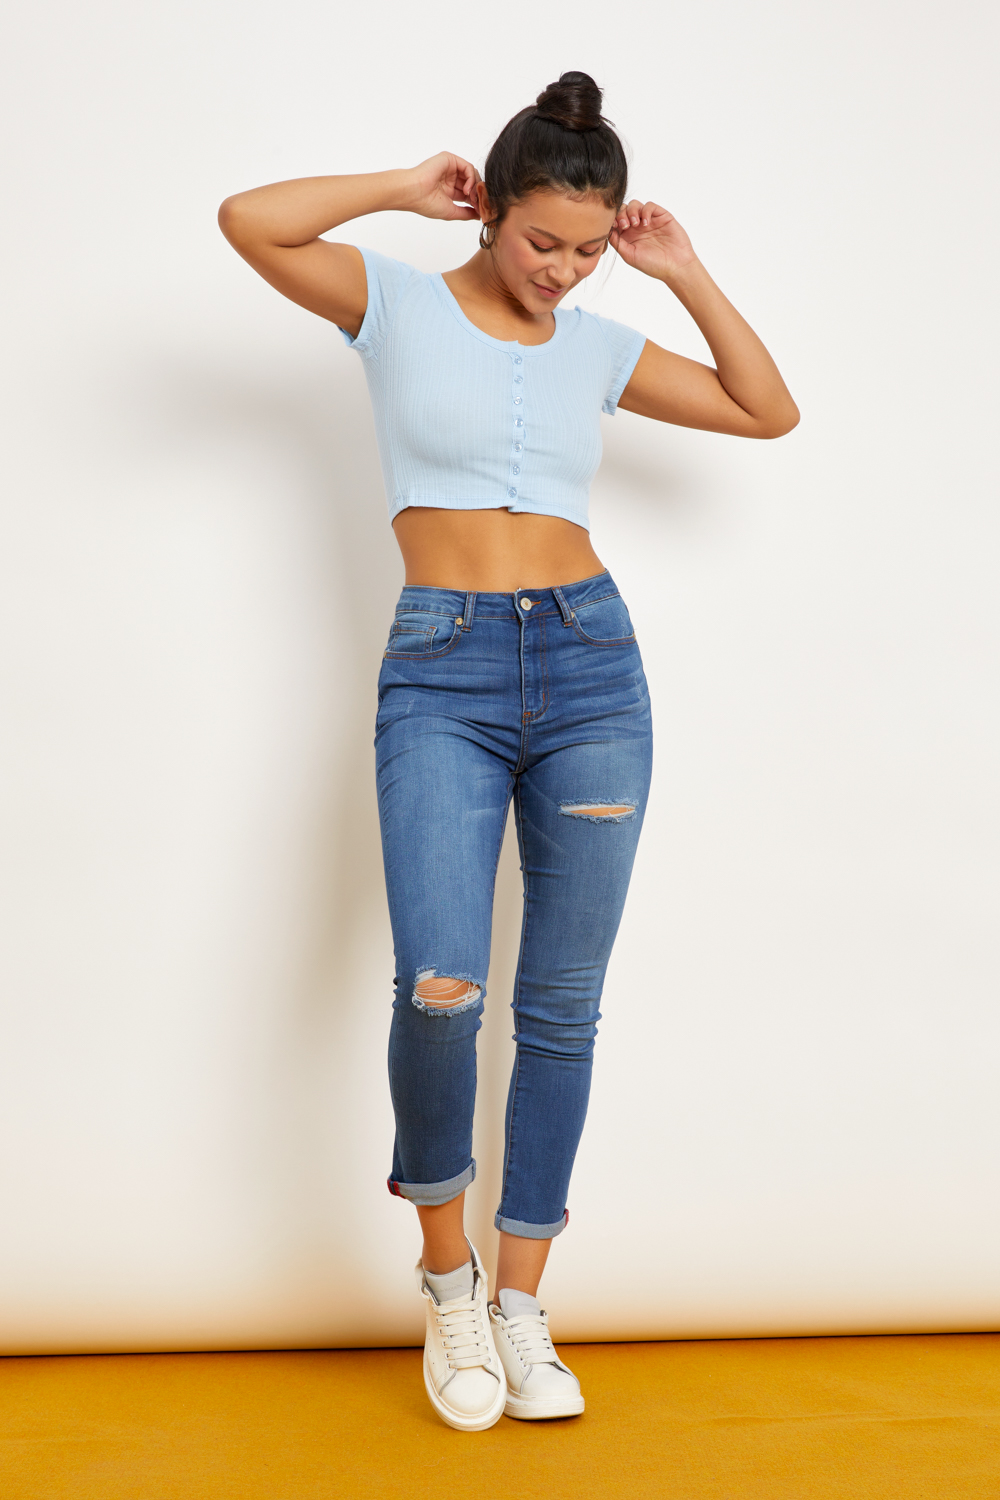 Button Front Scoop Neck Top